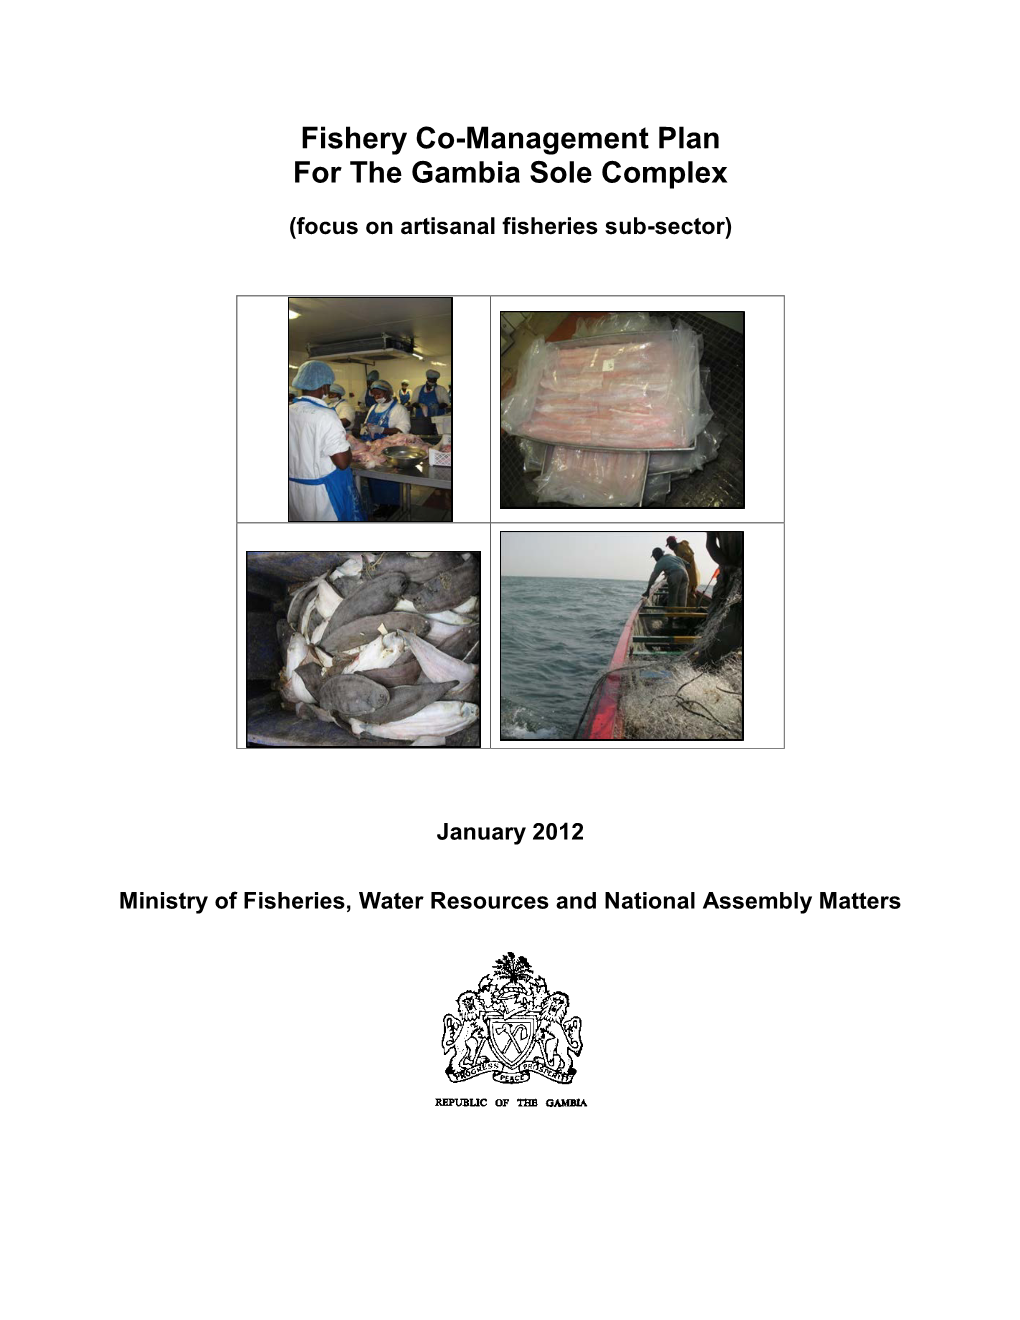 Fishery Co-Management Plan for the Gambia Sole Complex